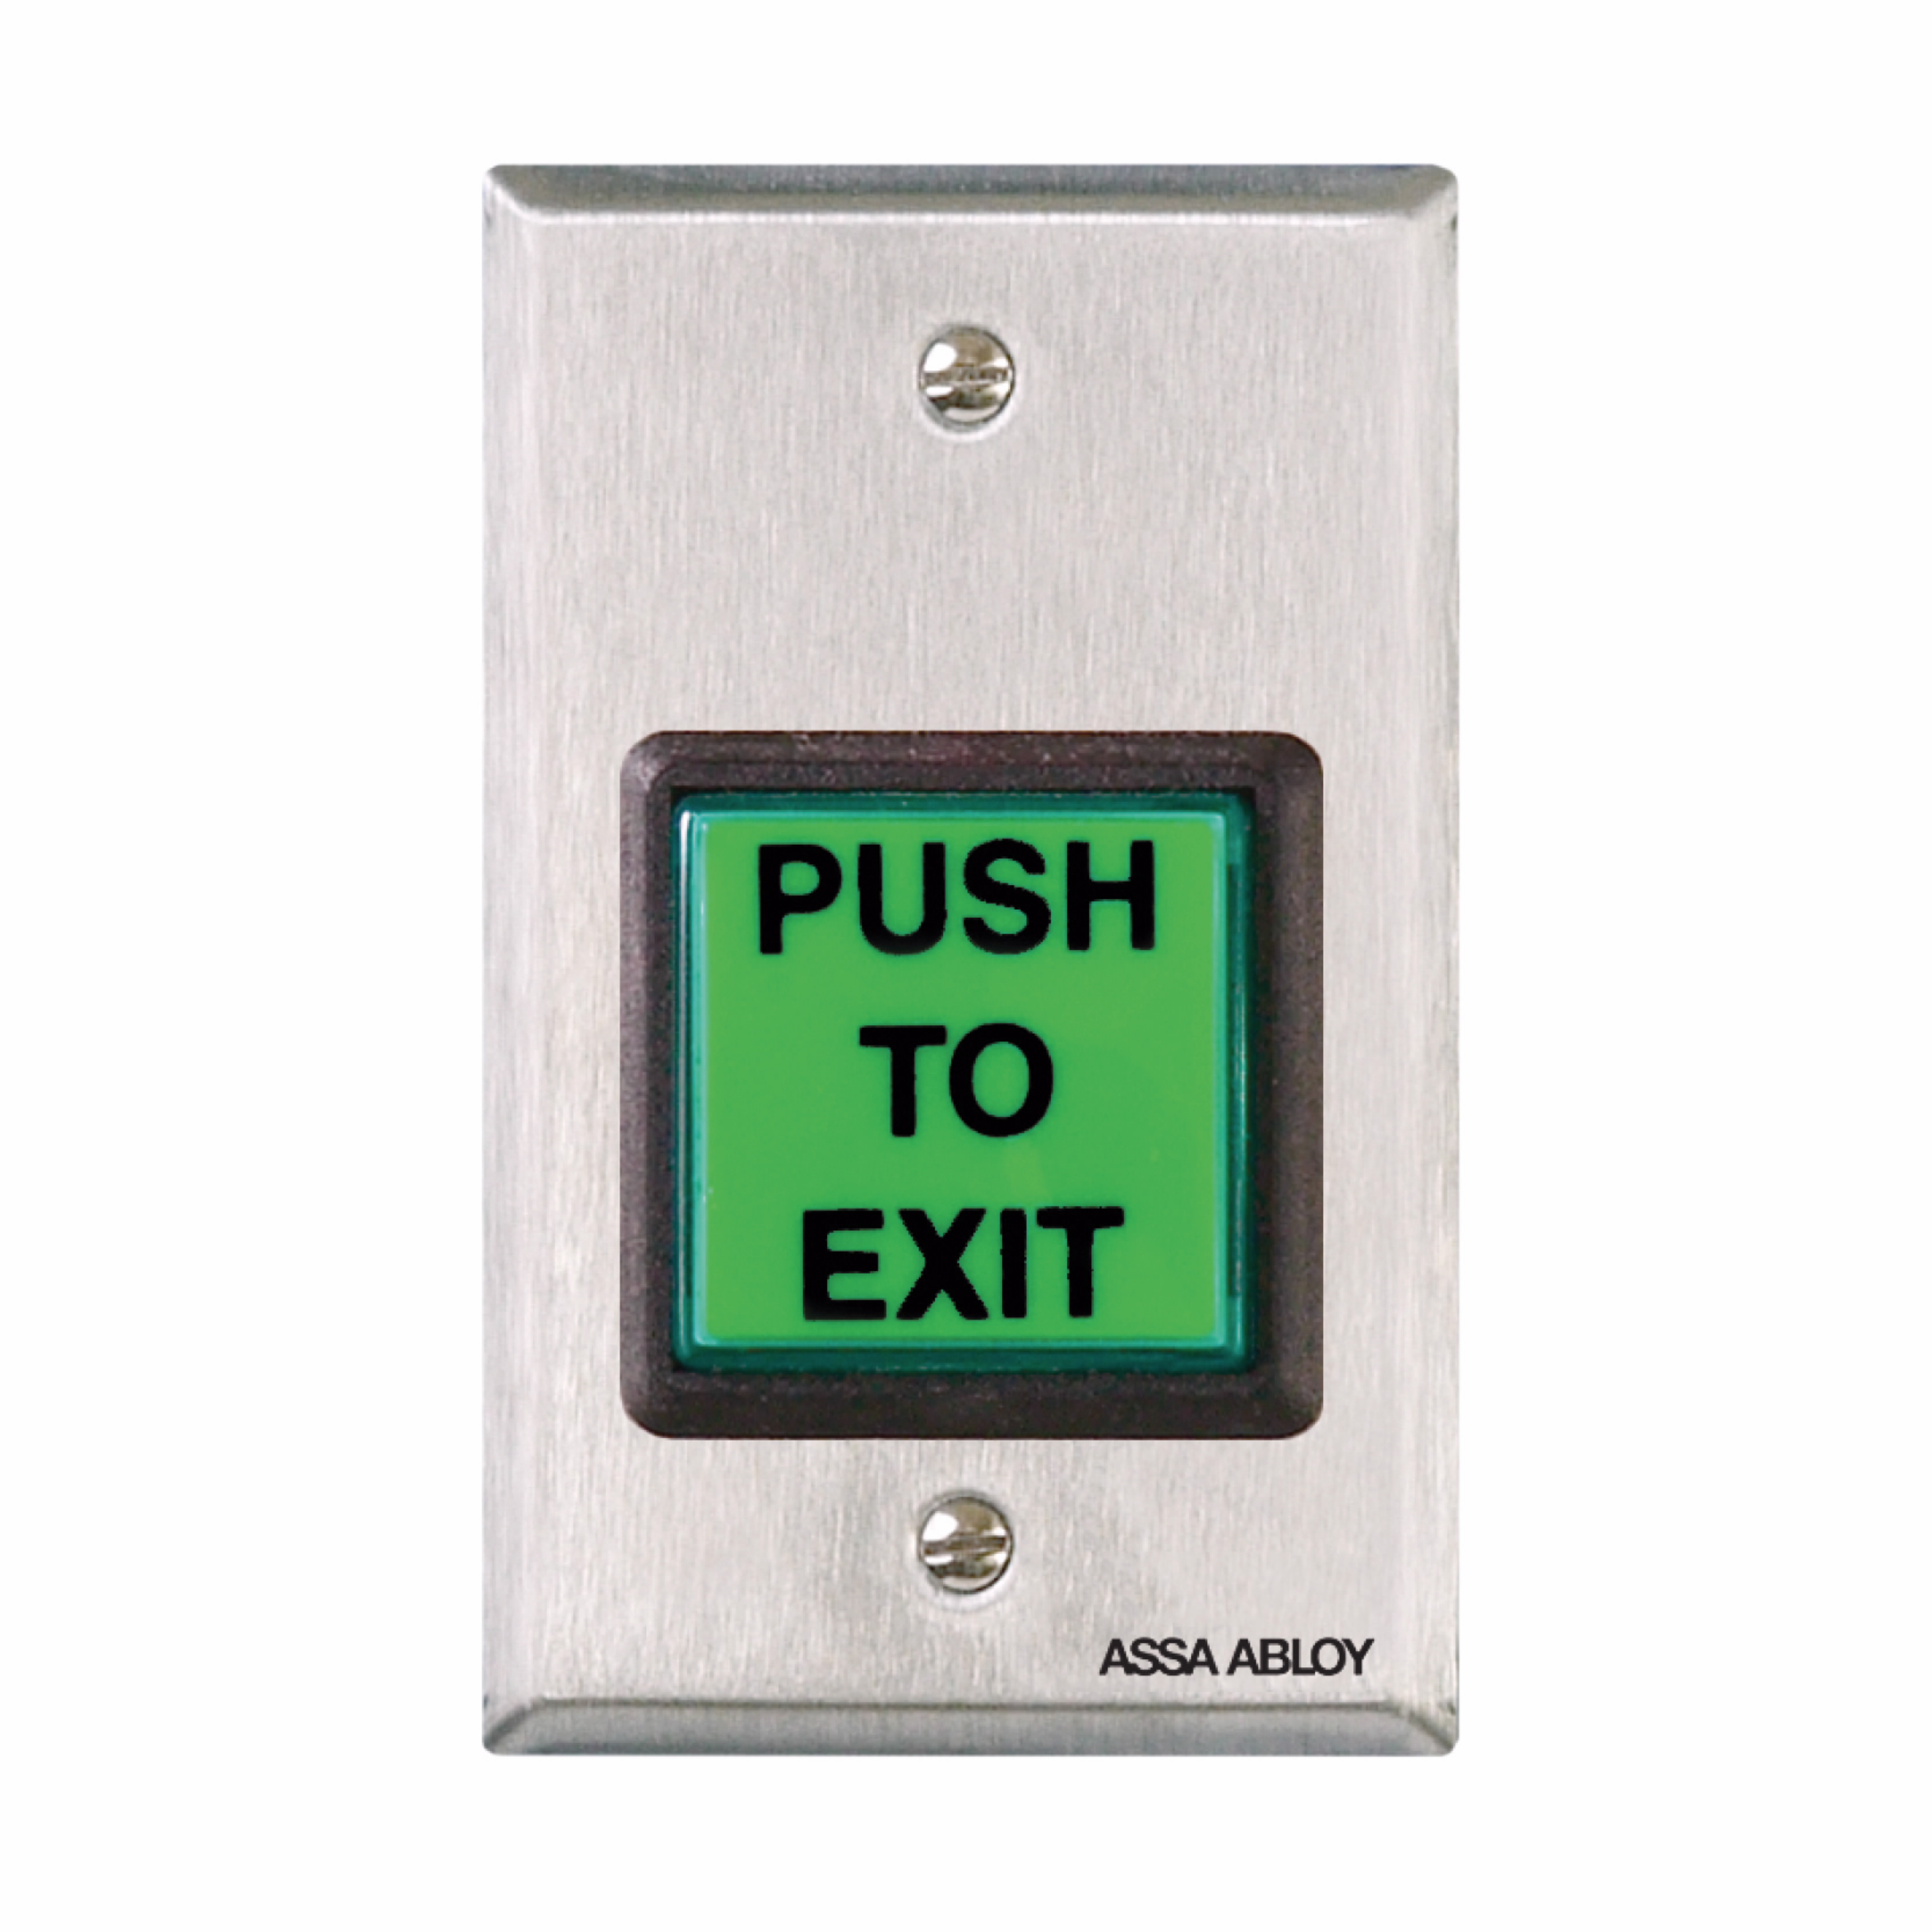 HEAVY DUTY EXTERNAL PUSH BUTTON WITH PRESS TO EXIT LOGO. 